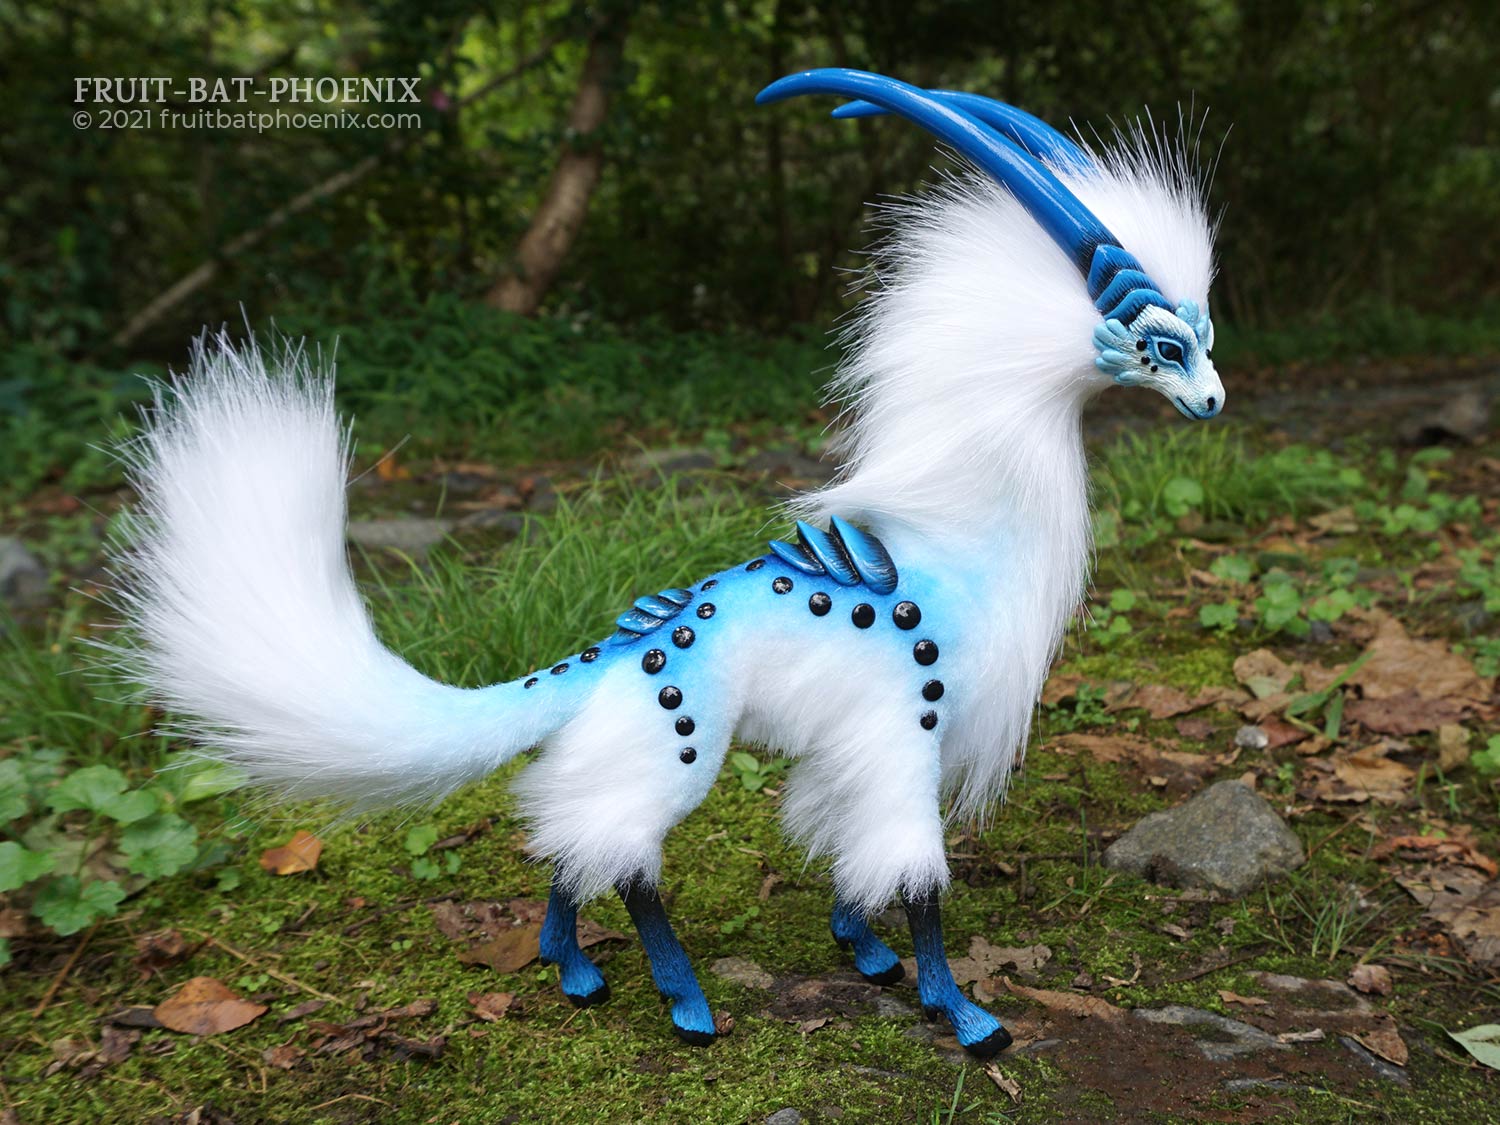 Cloud Antelope III, a white and blue graceful horned creature